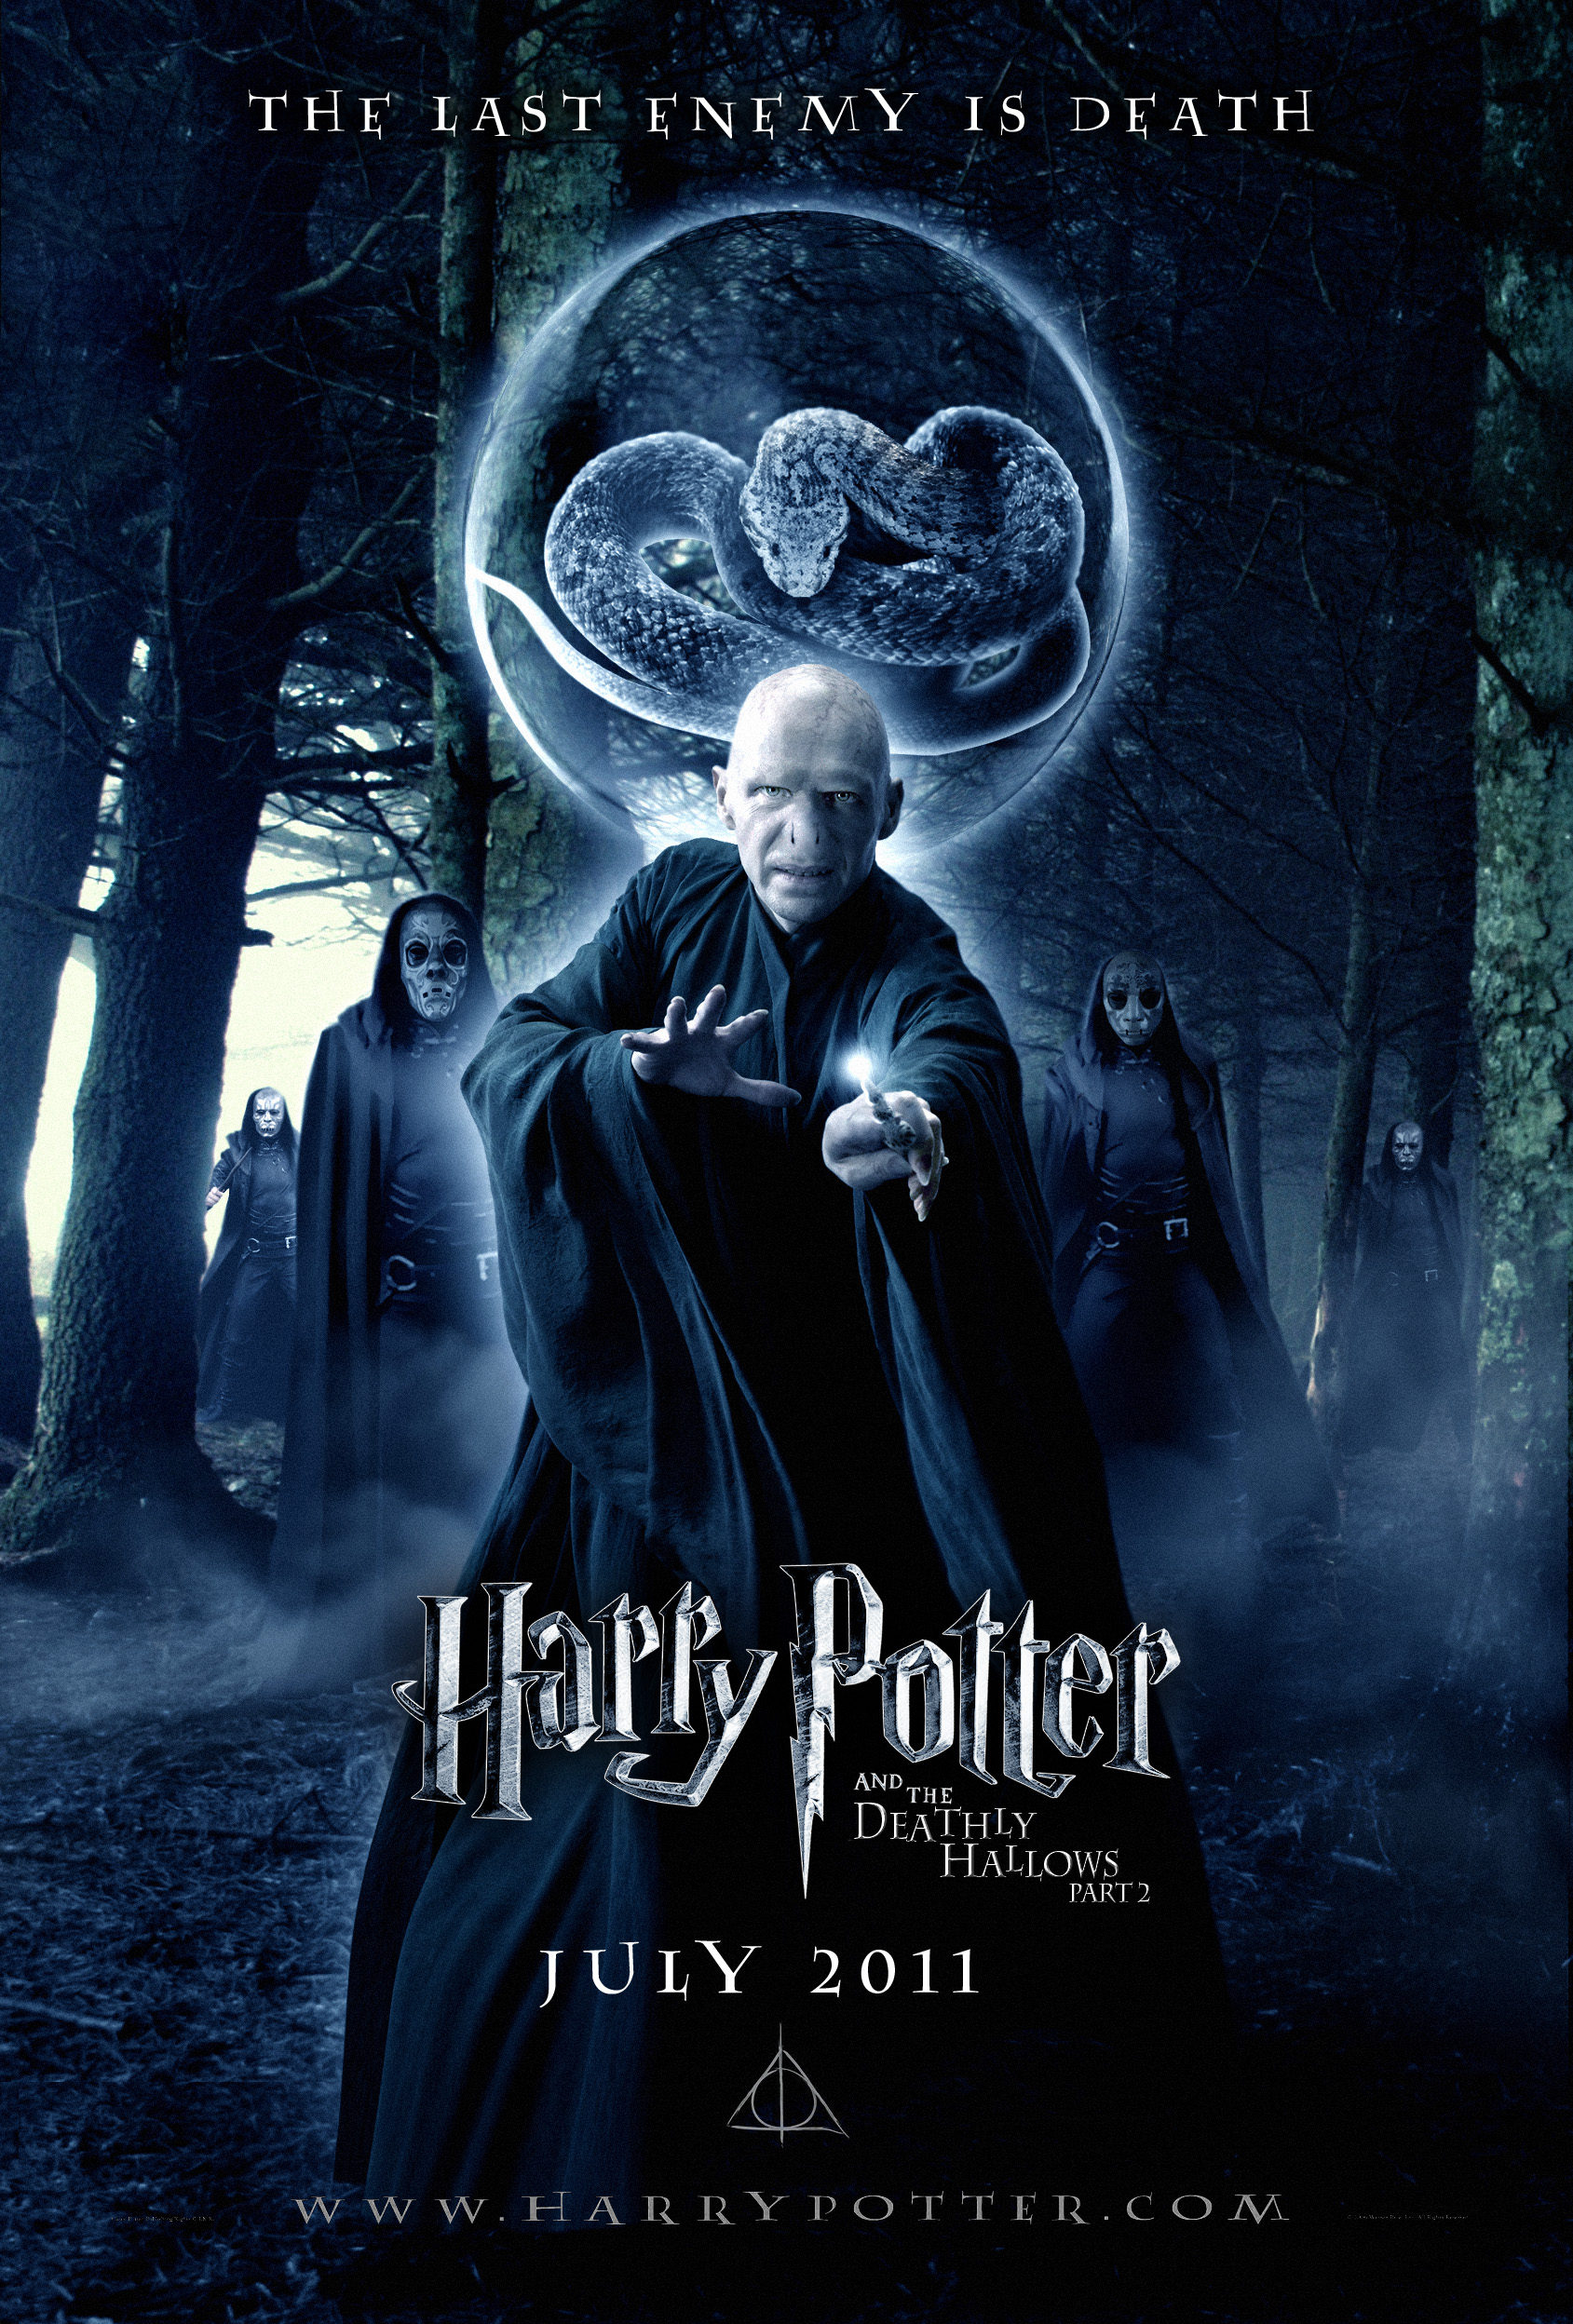 Deathly_Hallows_Part_2_Poster_by_theyoungtook.jpg